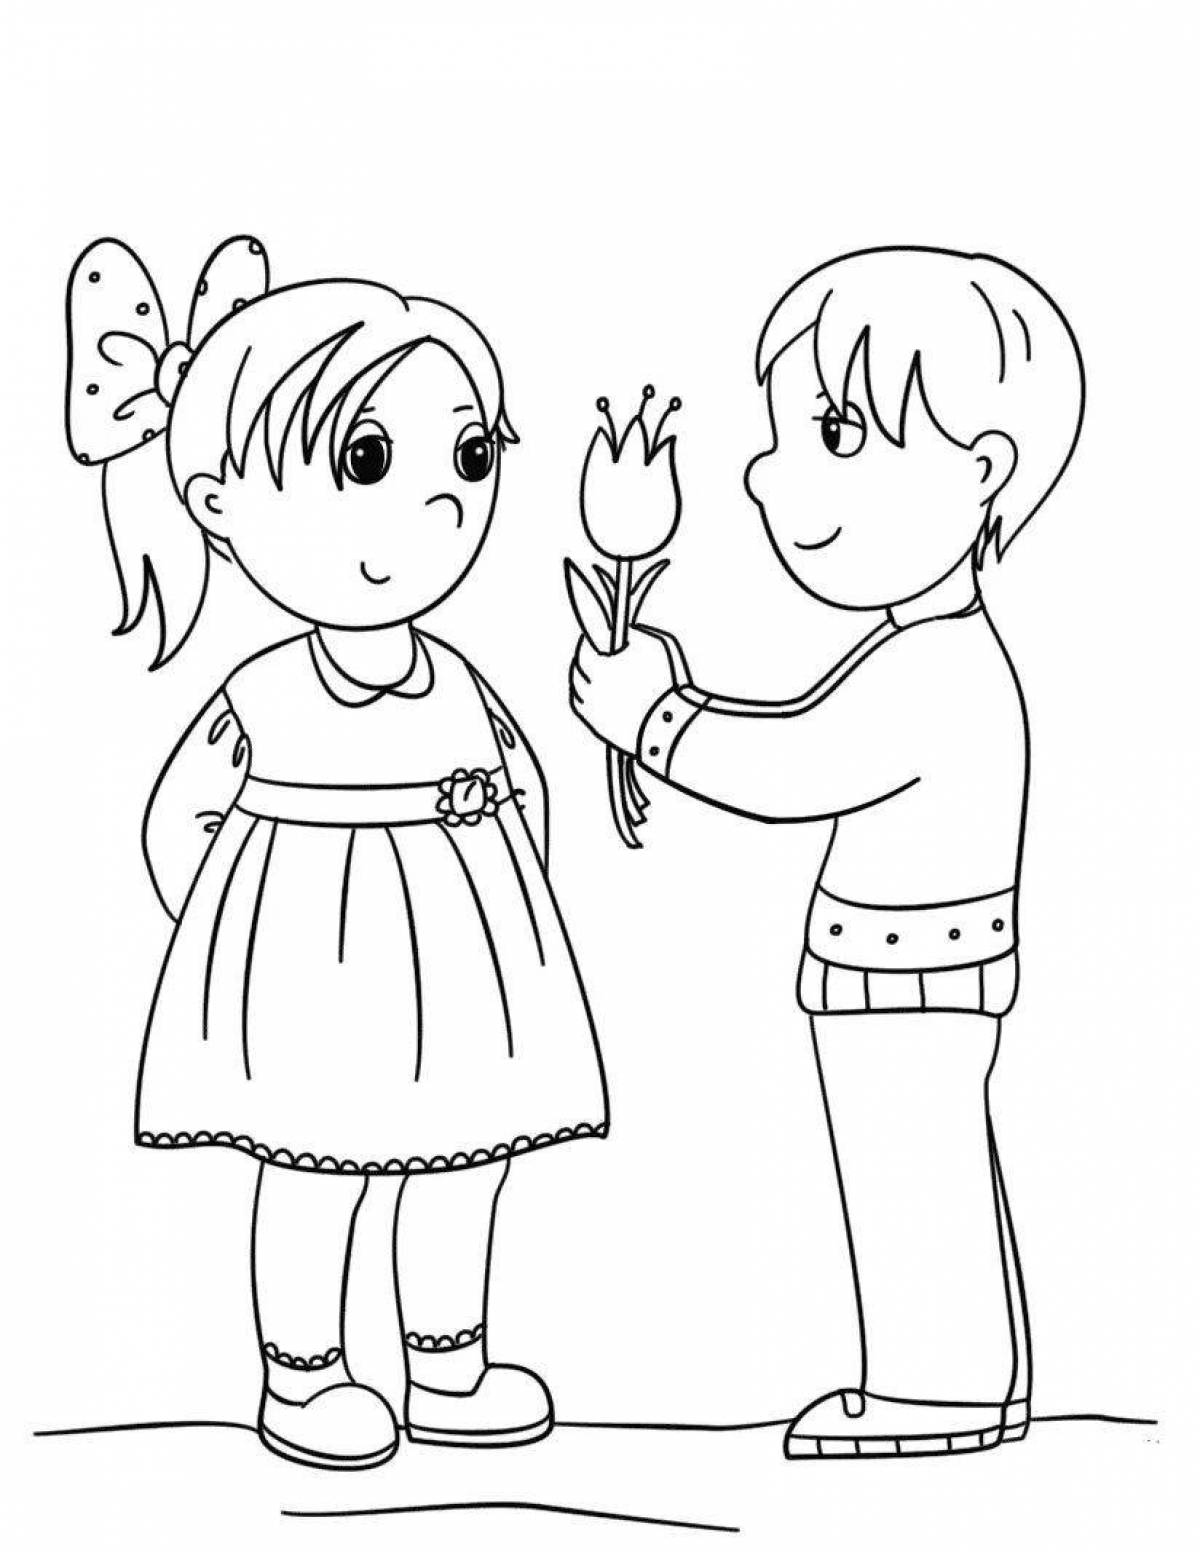 Adorable coloring book girl and boy drawing